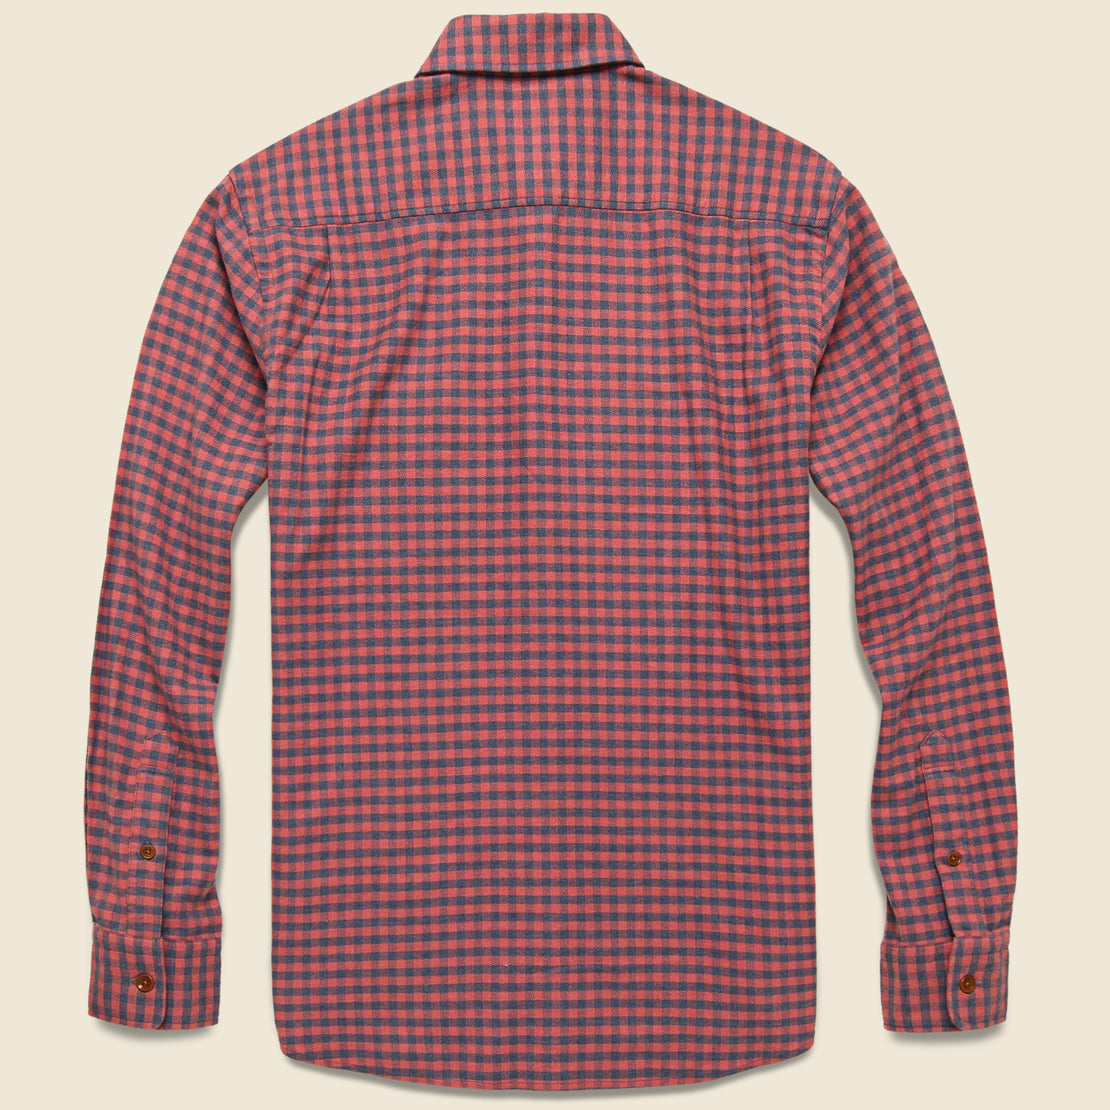 Stretch Seaview Flannel - Blue Rose Gingham - Faherty - STAG Provisions - Tops - L/S Woven - Plaid